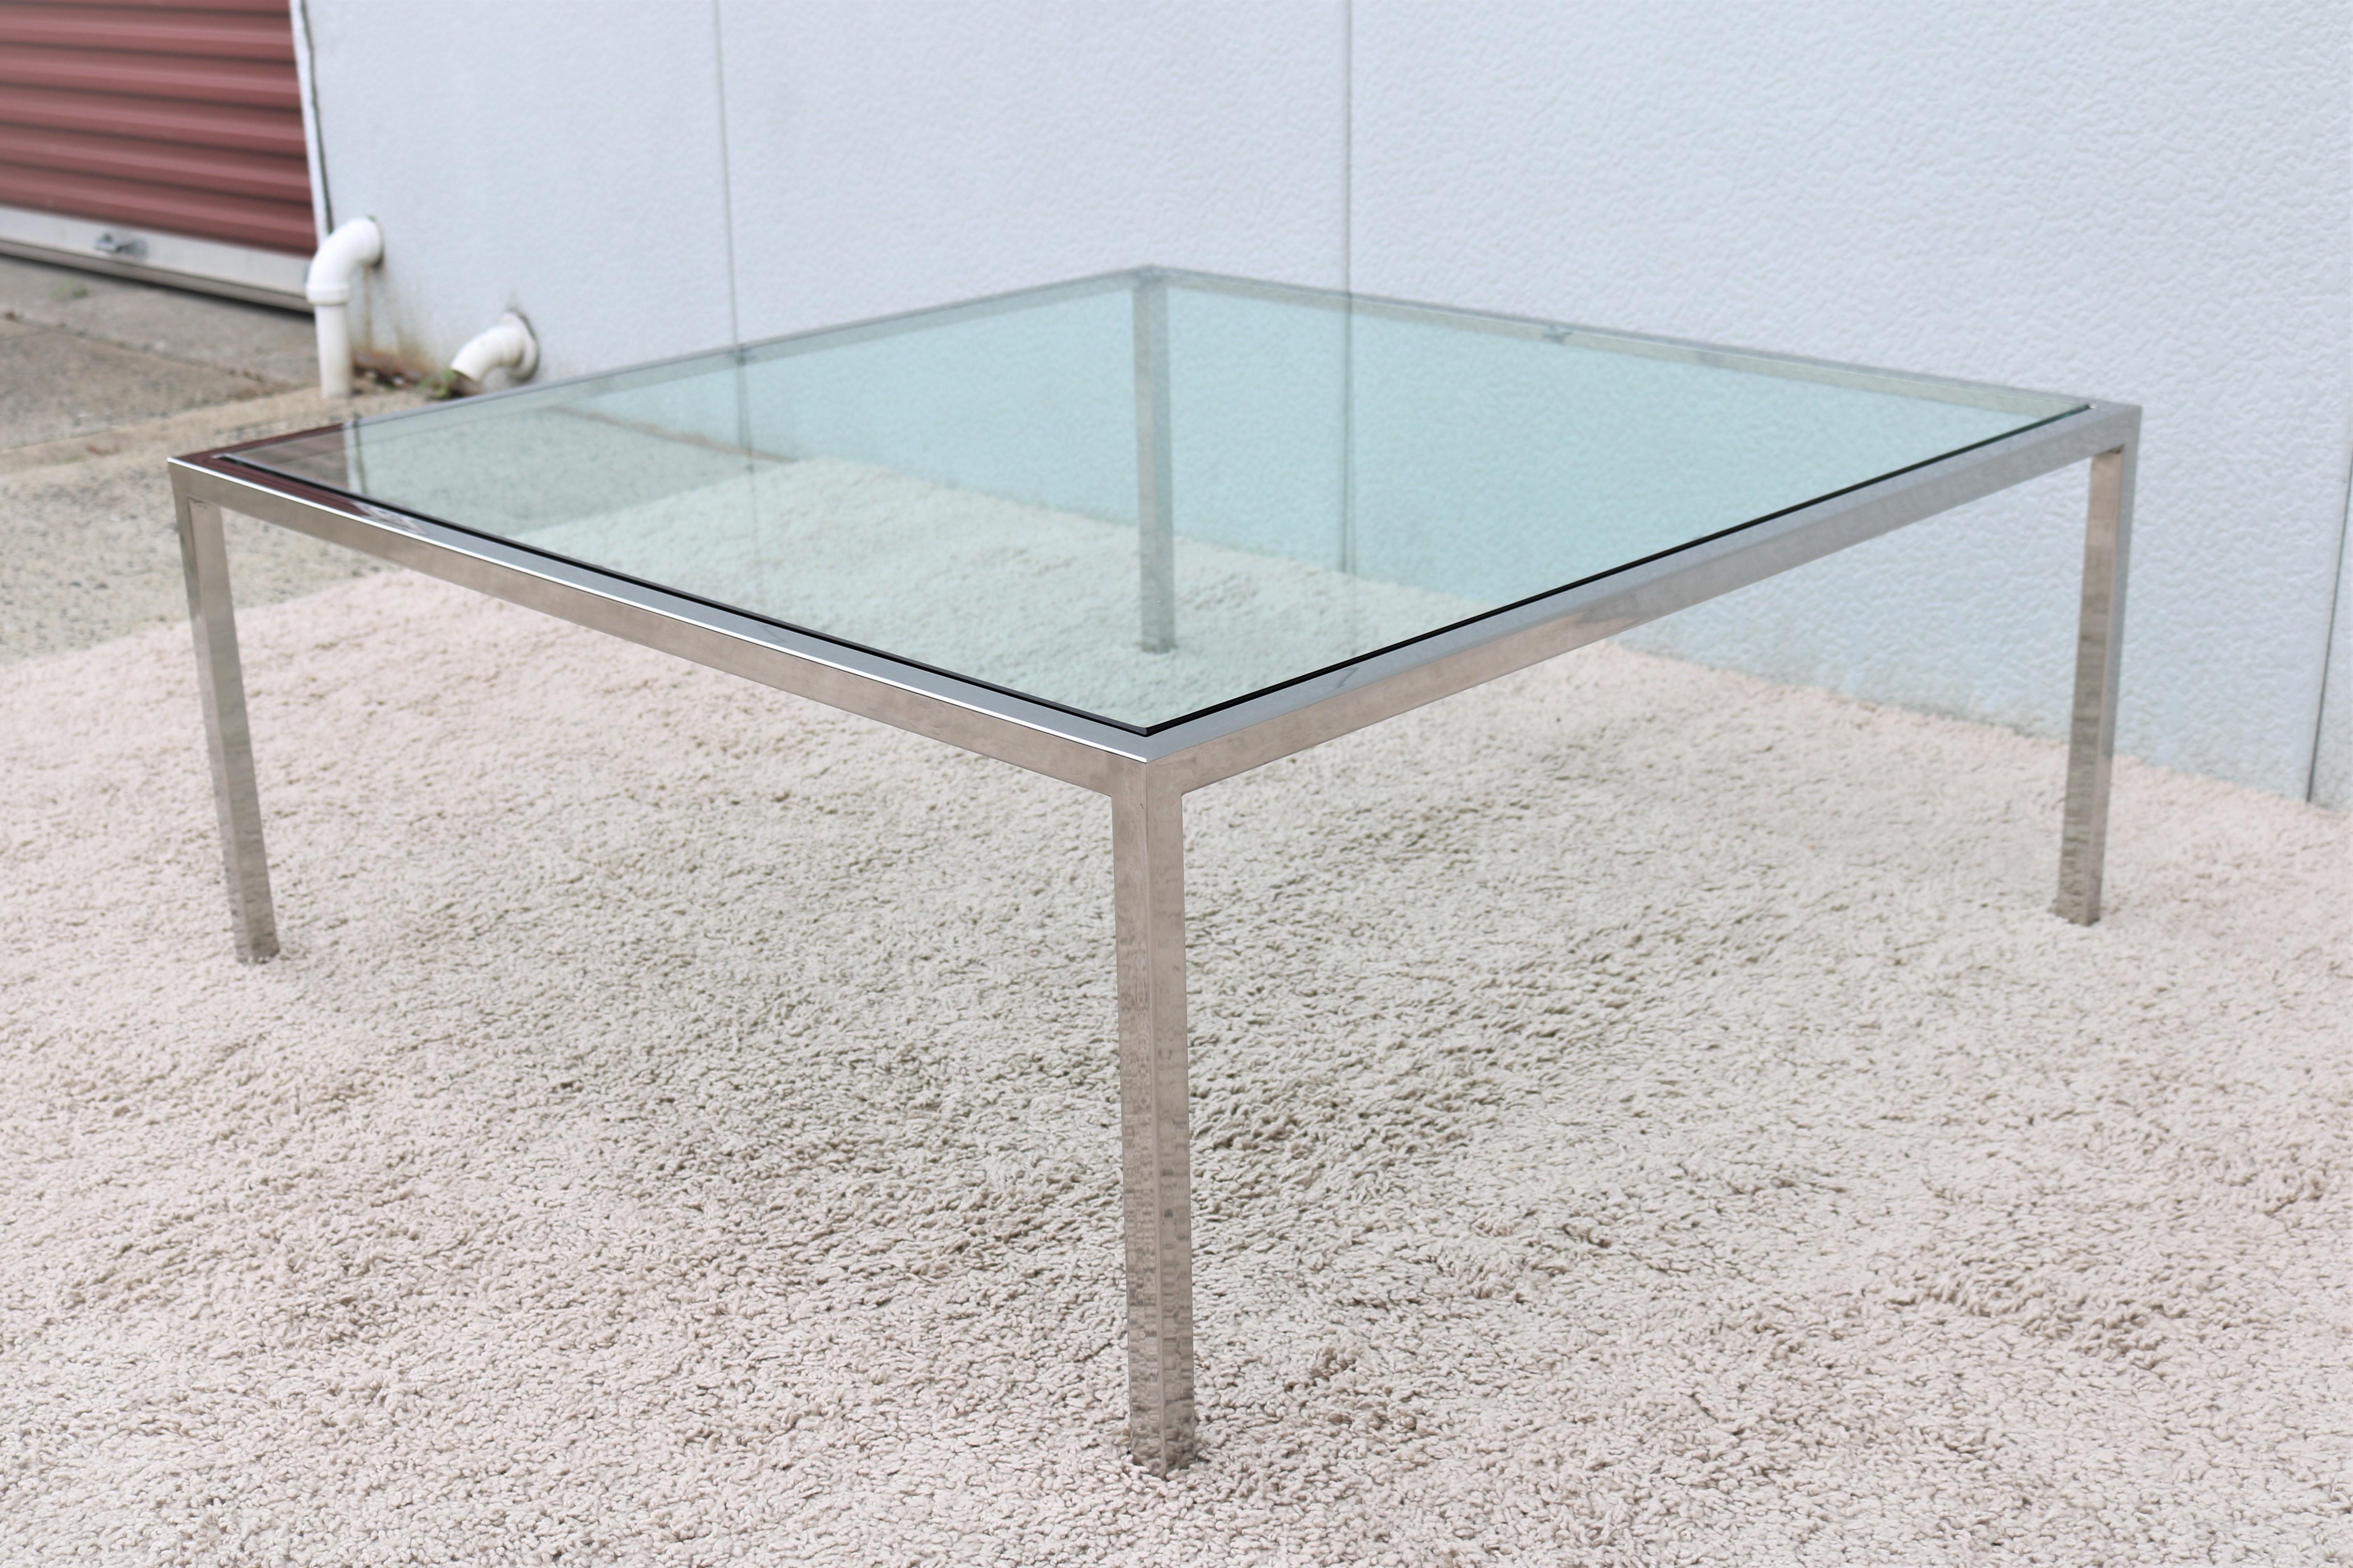 20th Century Mid-Century Modern Milo Baughman Style Glass Stainless Steel Square Coffee Table